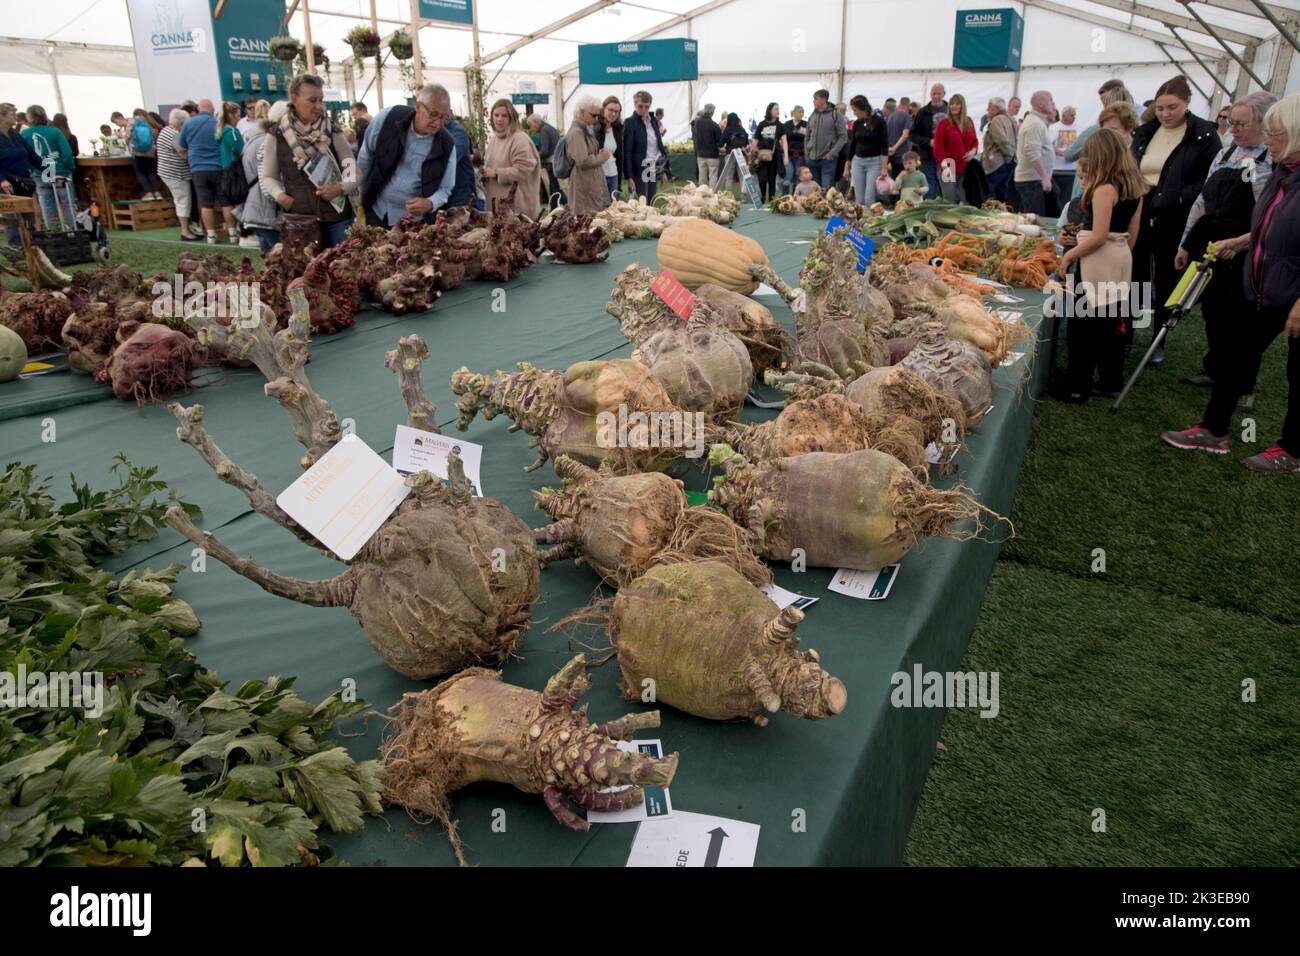 Visitors looking at exhibits of some of the giant vegetables at Three Counties Autumn Show  Great Malvern, UK Stock Photo